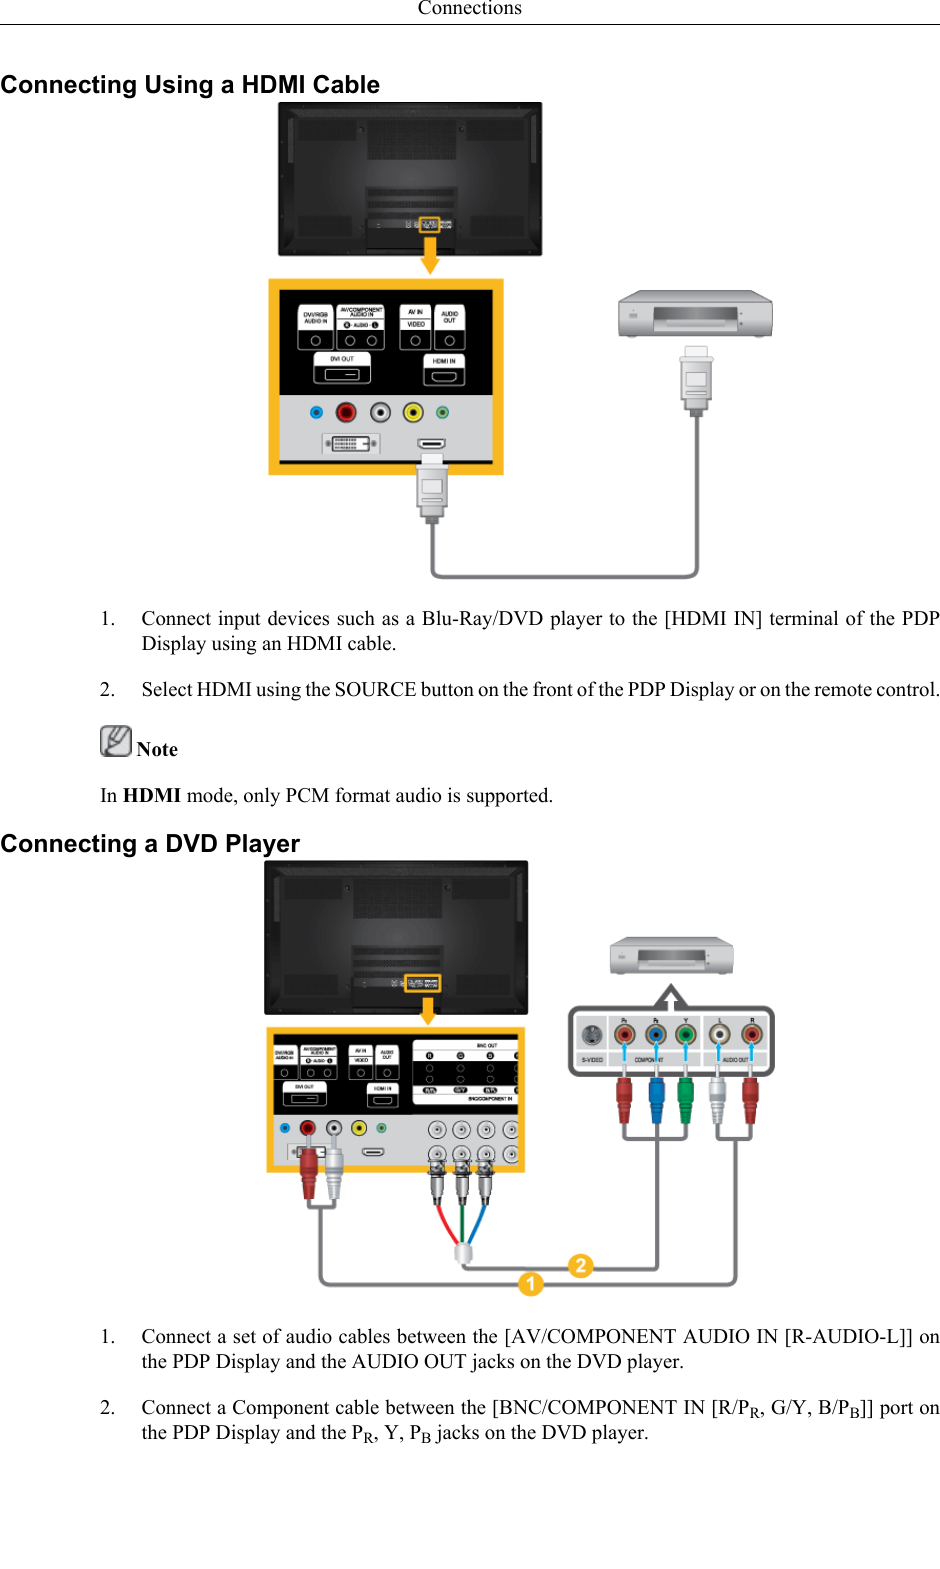 Connecting Using a HDMI Cable1. Connect input devices such as a Blu-Ray/DVD player to the [HDMI IN] terminal of the PDPDisplay using an HDMI cable.2. Select HDMI using the SOURCE button on the front of the PDP Display or on the remote control. NoteIn HDMI mode, only PCM format audio is supported.Connecting a DVD Player1. Connect a set of audio cables between the [AV/COMPONENT AUDIO IN [R-AUDIO-L]] onthe PDP Display and the AUDIO OUT jacks on the DVD player.2. Connect a Component cable between the [BNC/COMPONENT IN [R/PR, G/Y, B/PB]] port onthe PDP Display and the PR, Y, PB jacks on the DVD player.Connections